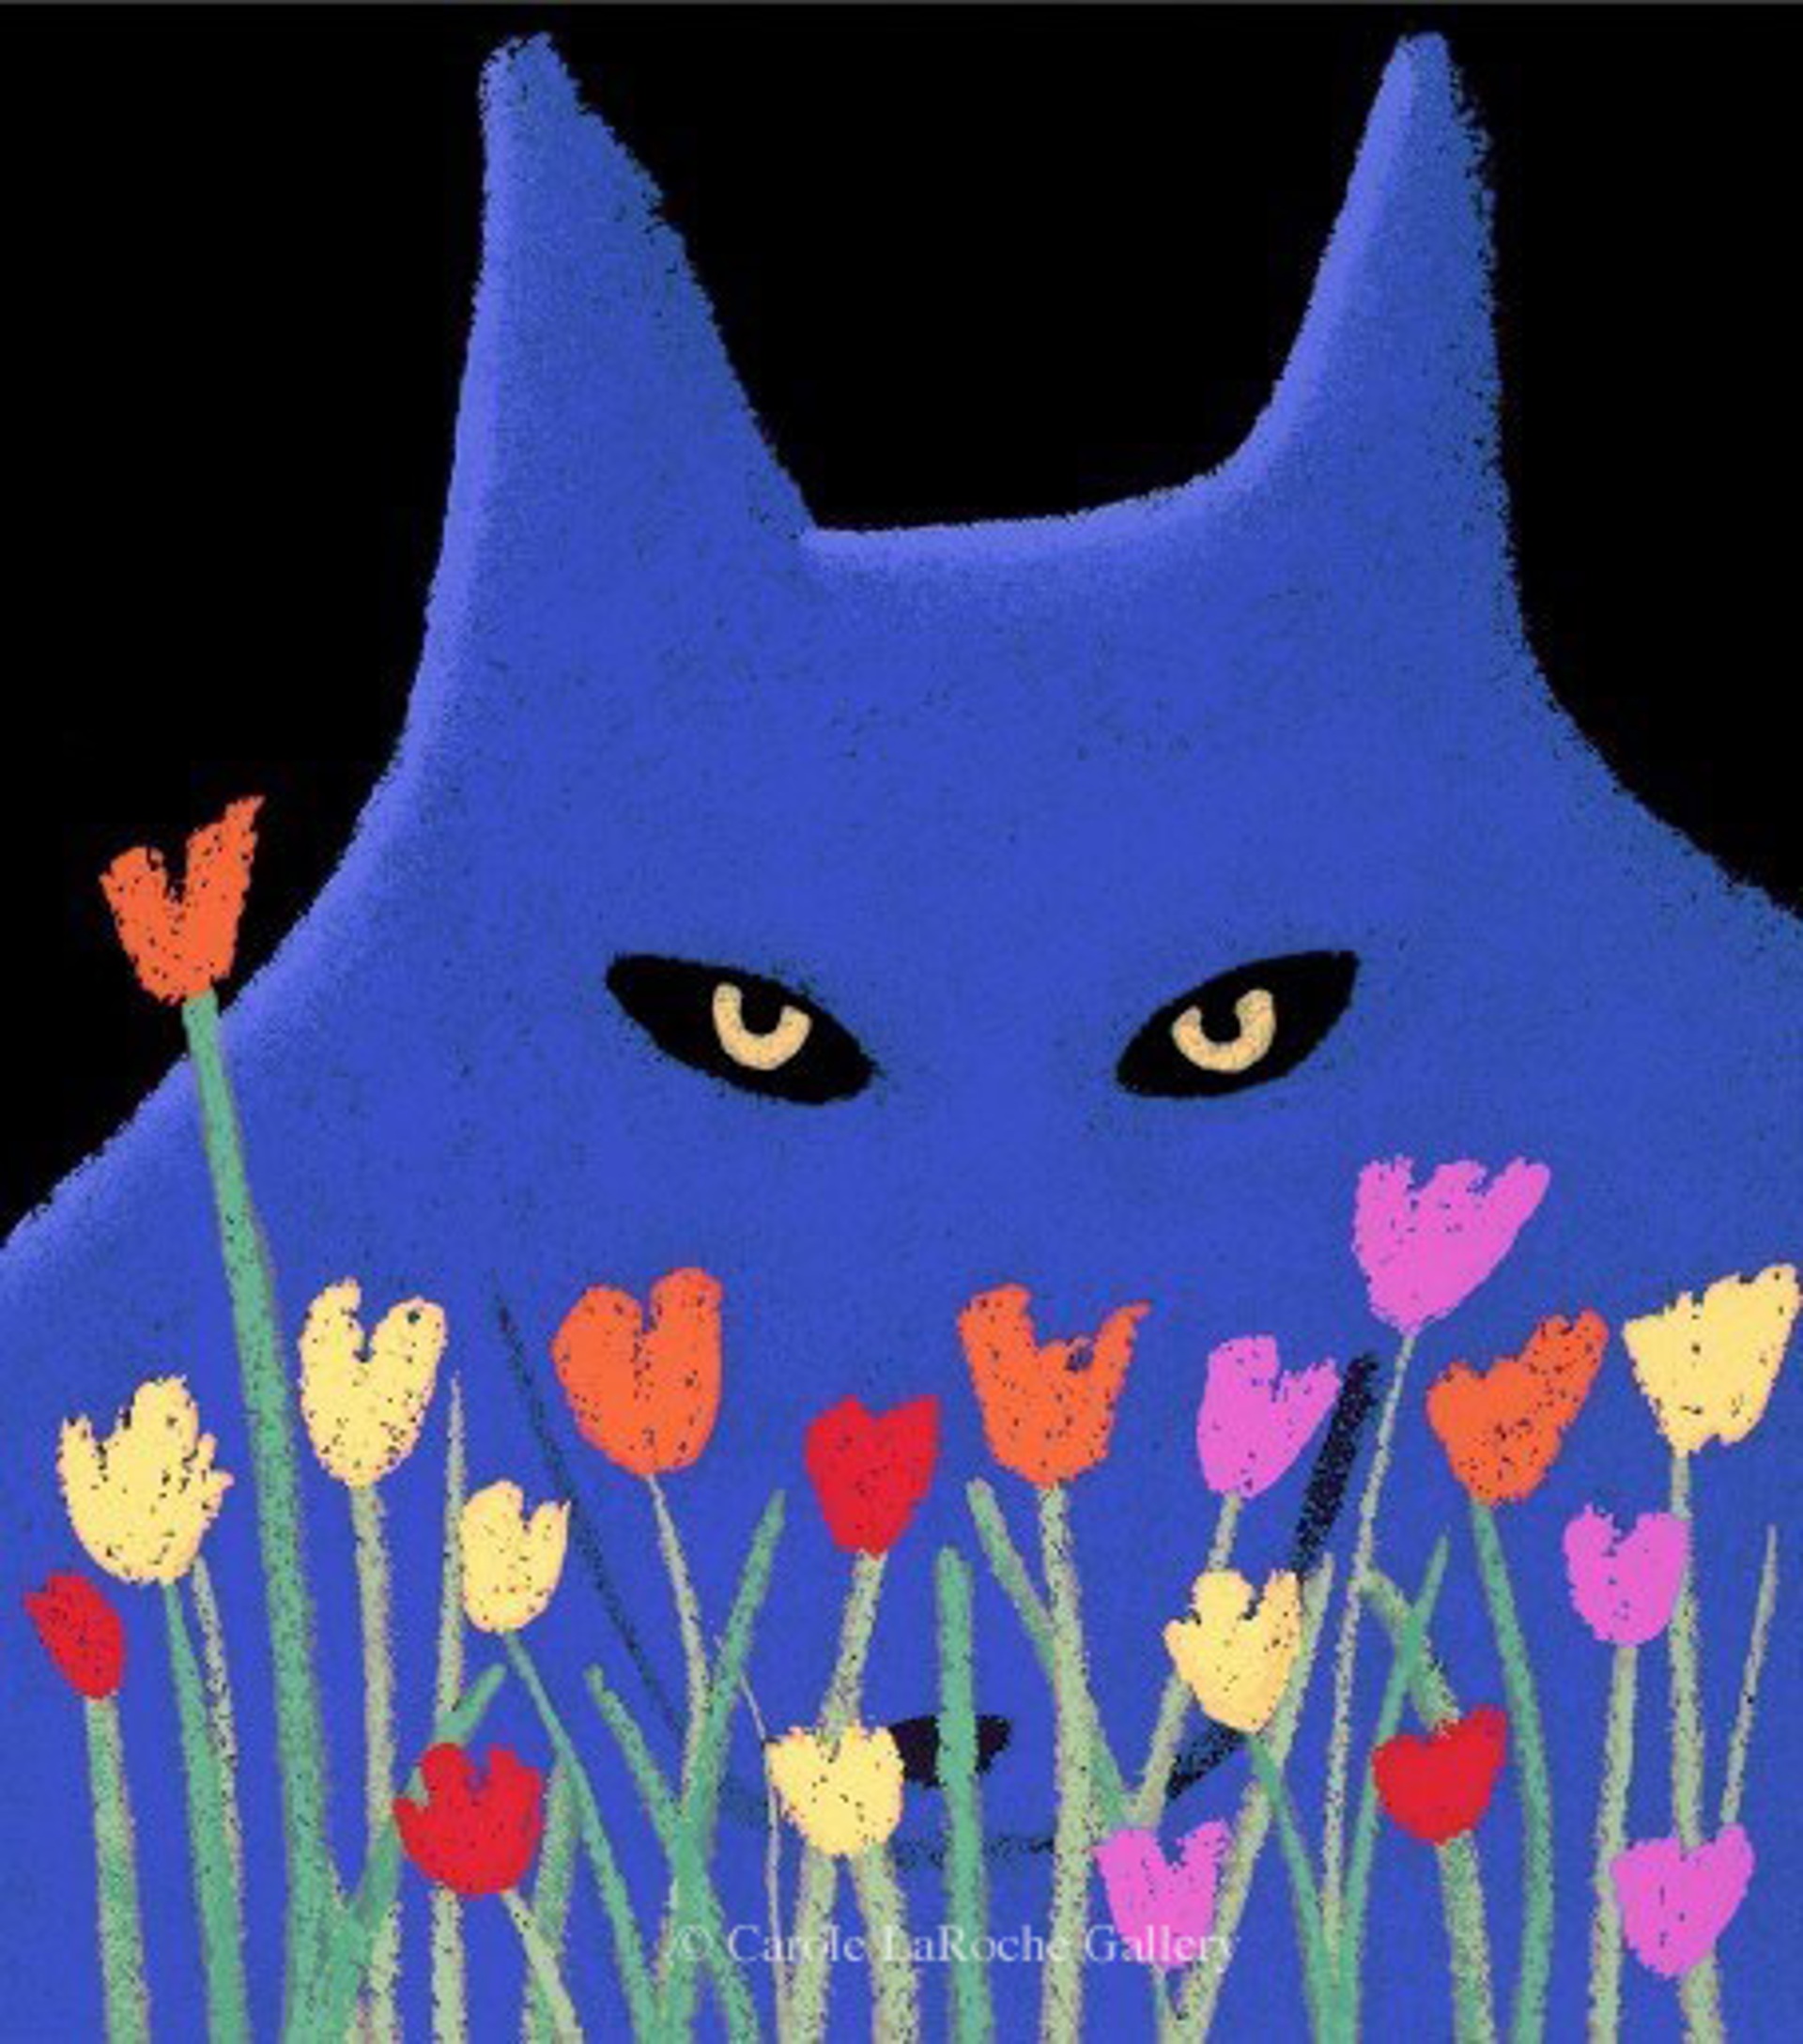 SINGLE BLUE WOLF WITH FLOWERS - limited edition giclee on paper w/frame size of 23"x20" by Carole LaRoche